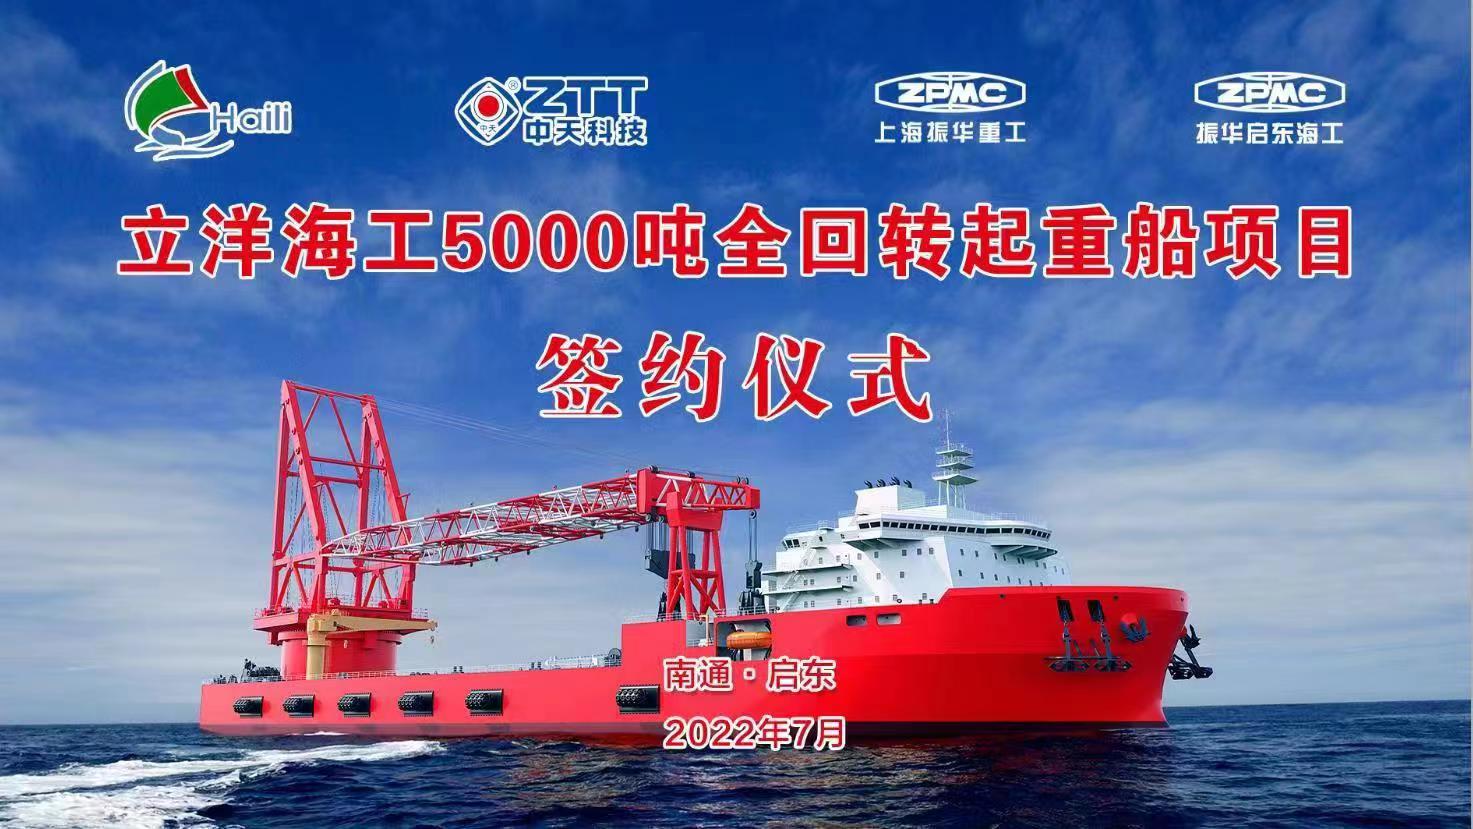 The 5000-ton self-propelled slewing crane ship project of Liyang Offshore was successfully signed